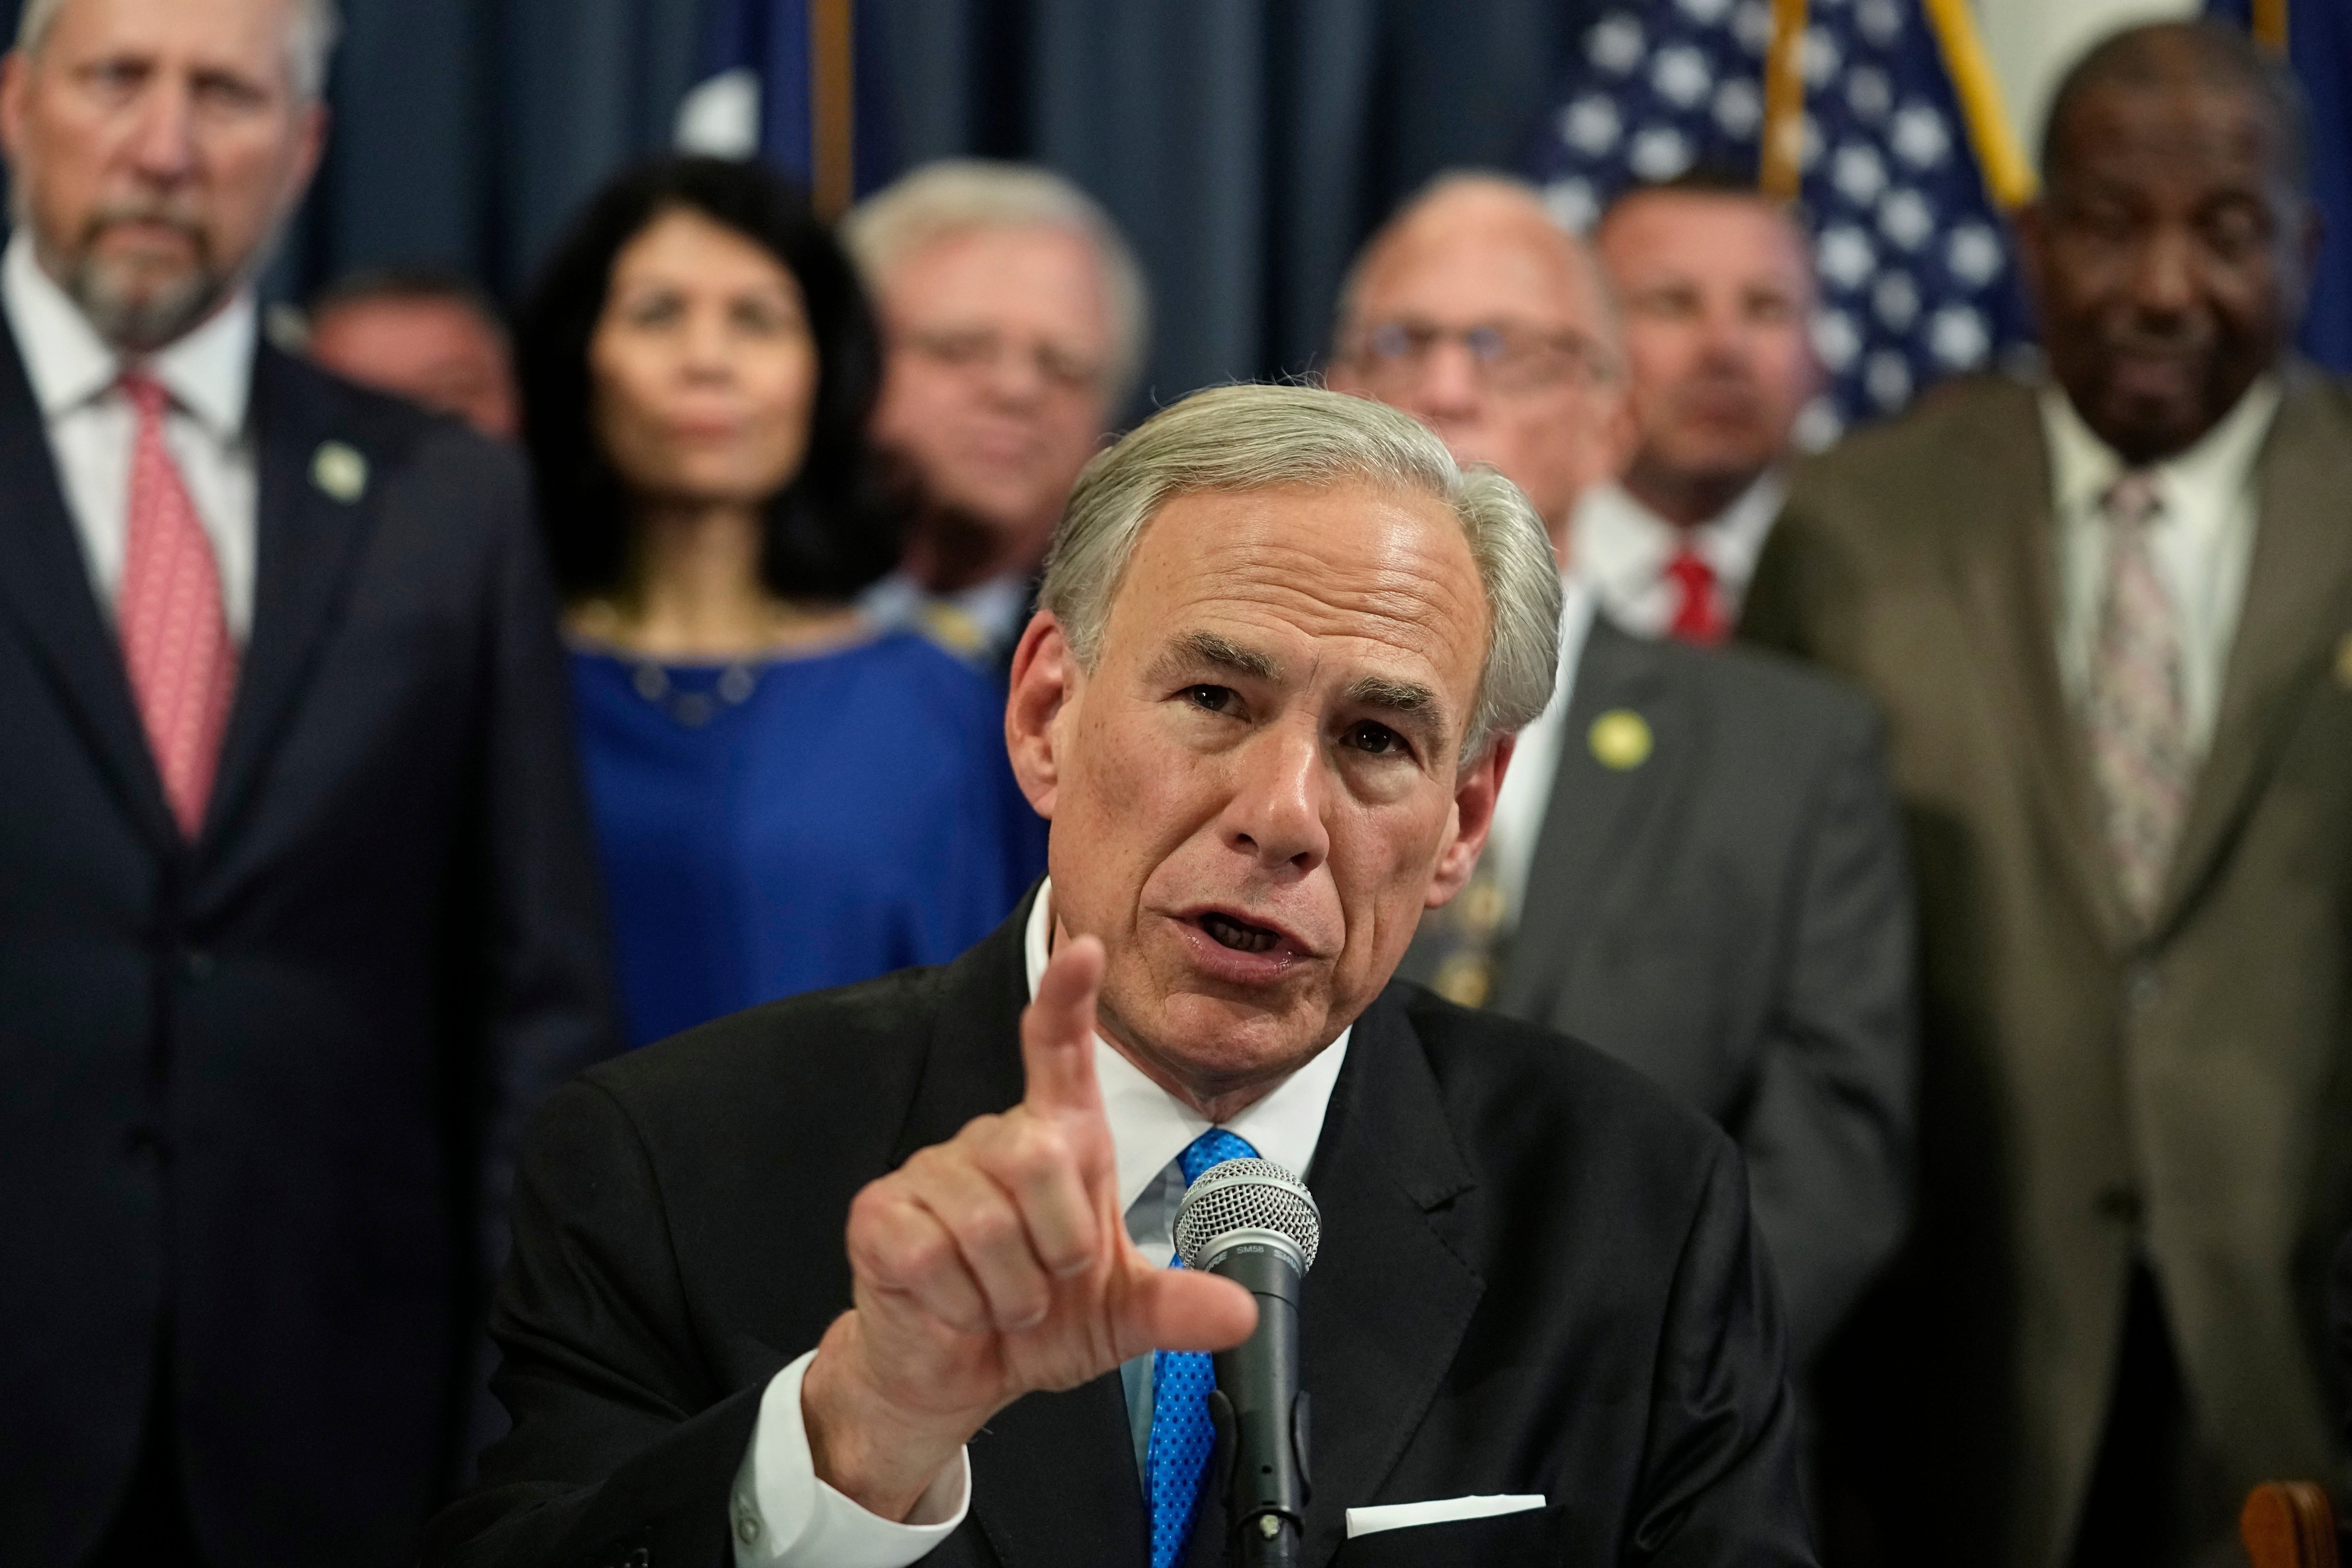 Texas governor Greg Abbott has used Covid funds and a state disaster declaration to increase his power over the US-Mexico border